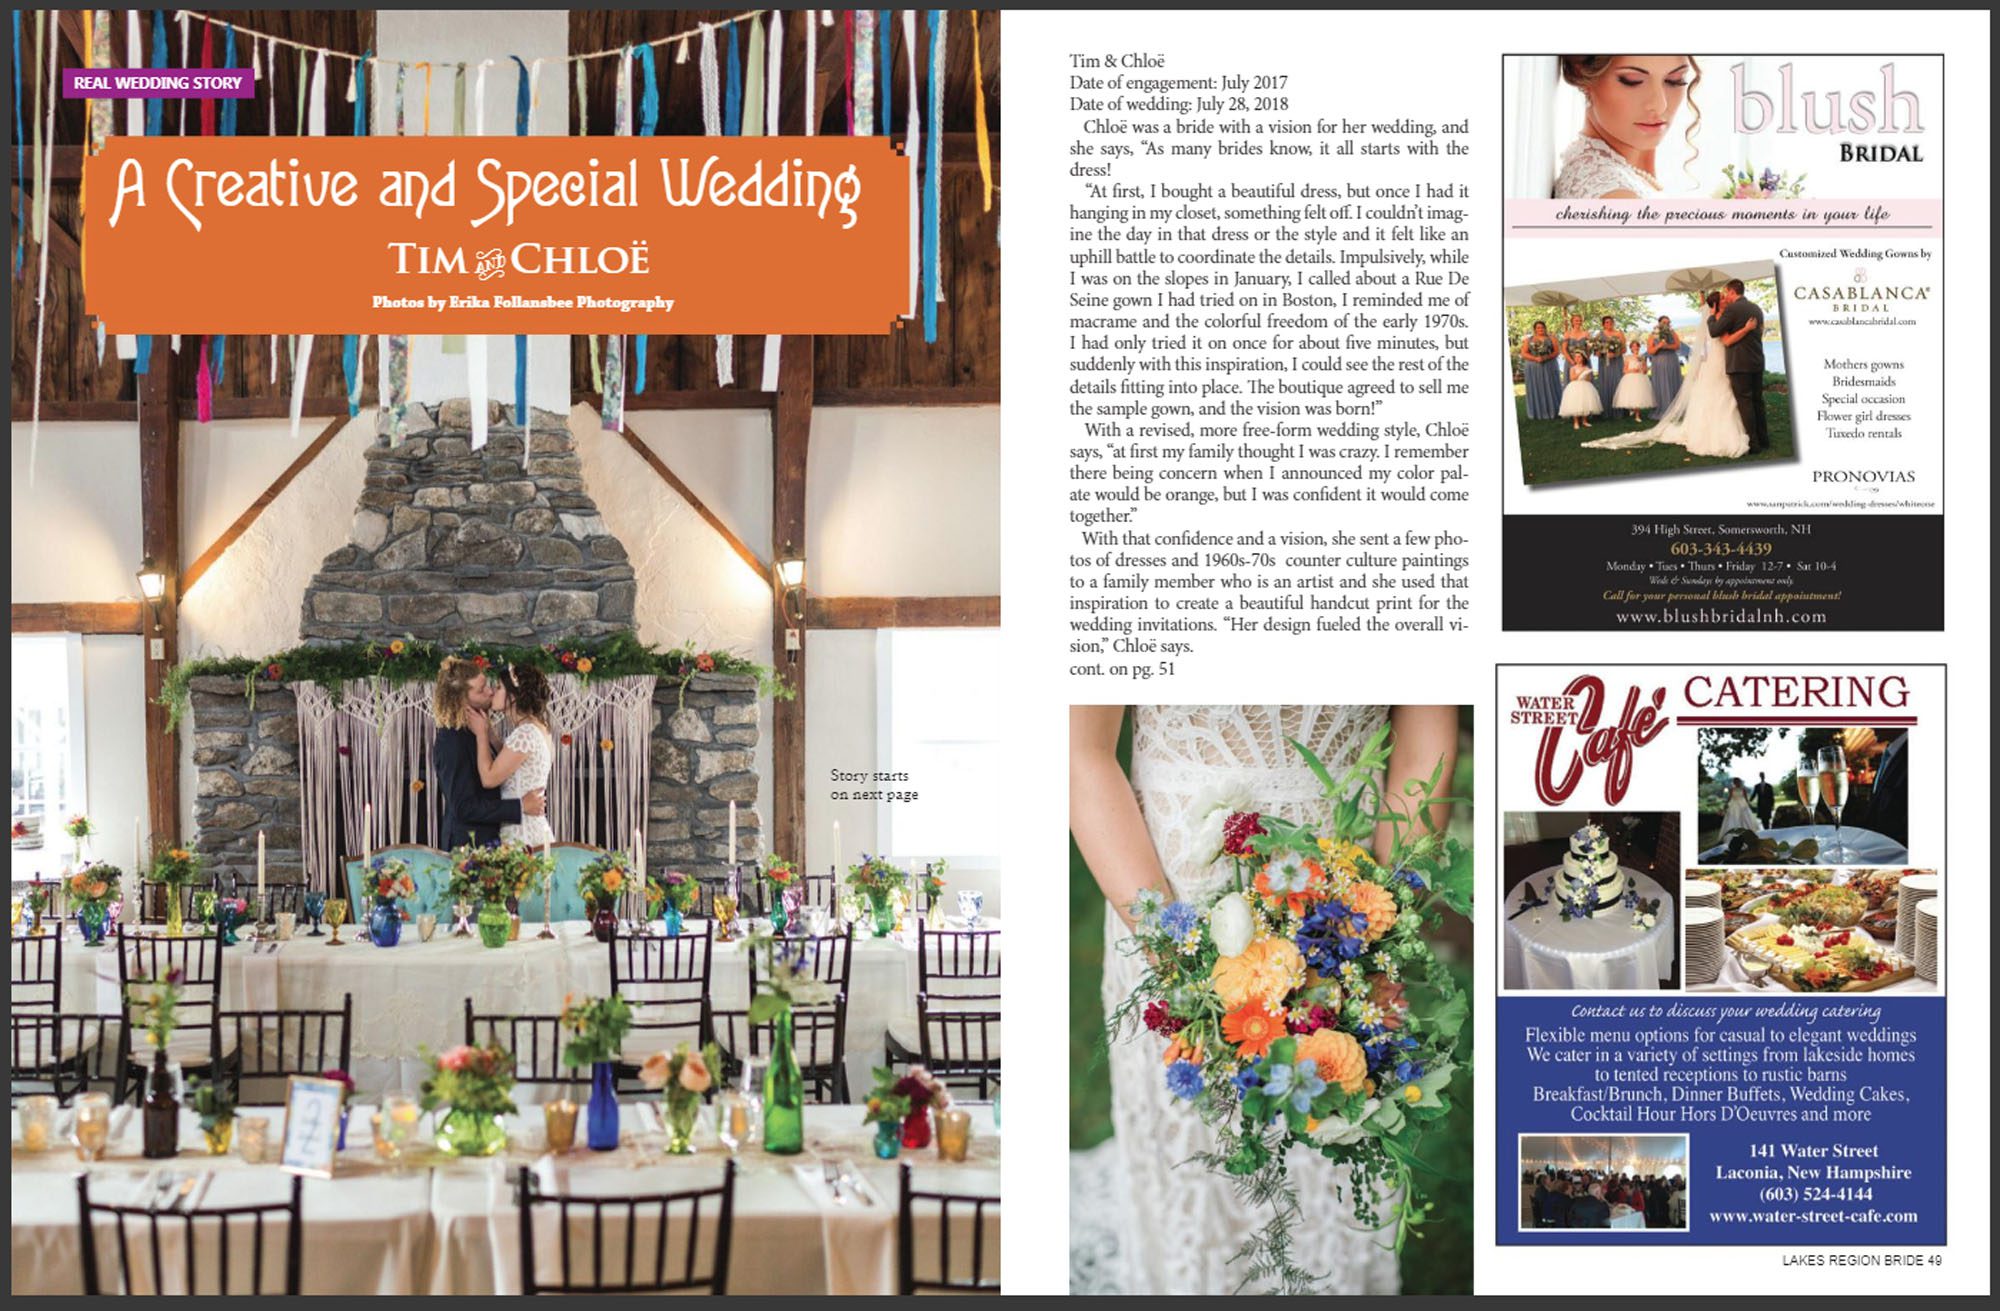 Chloë and Tim's wedding was featured in the 2019 Lakes Region Bride magazine as a Real Wedding Story